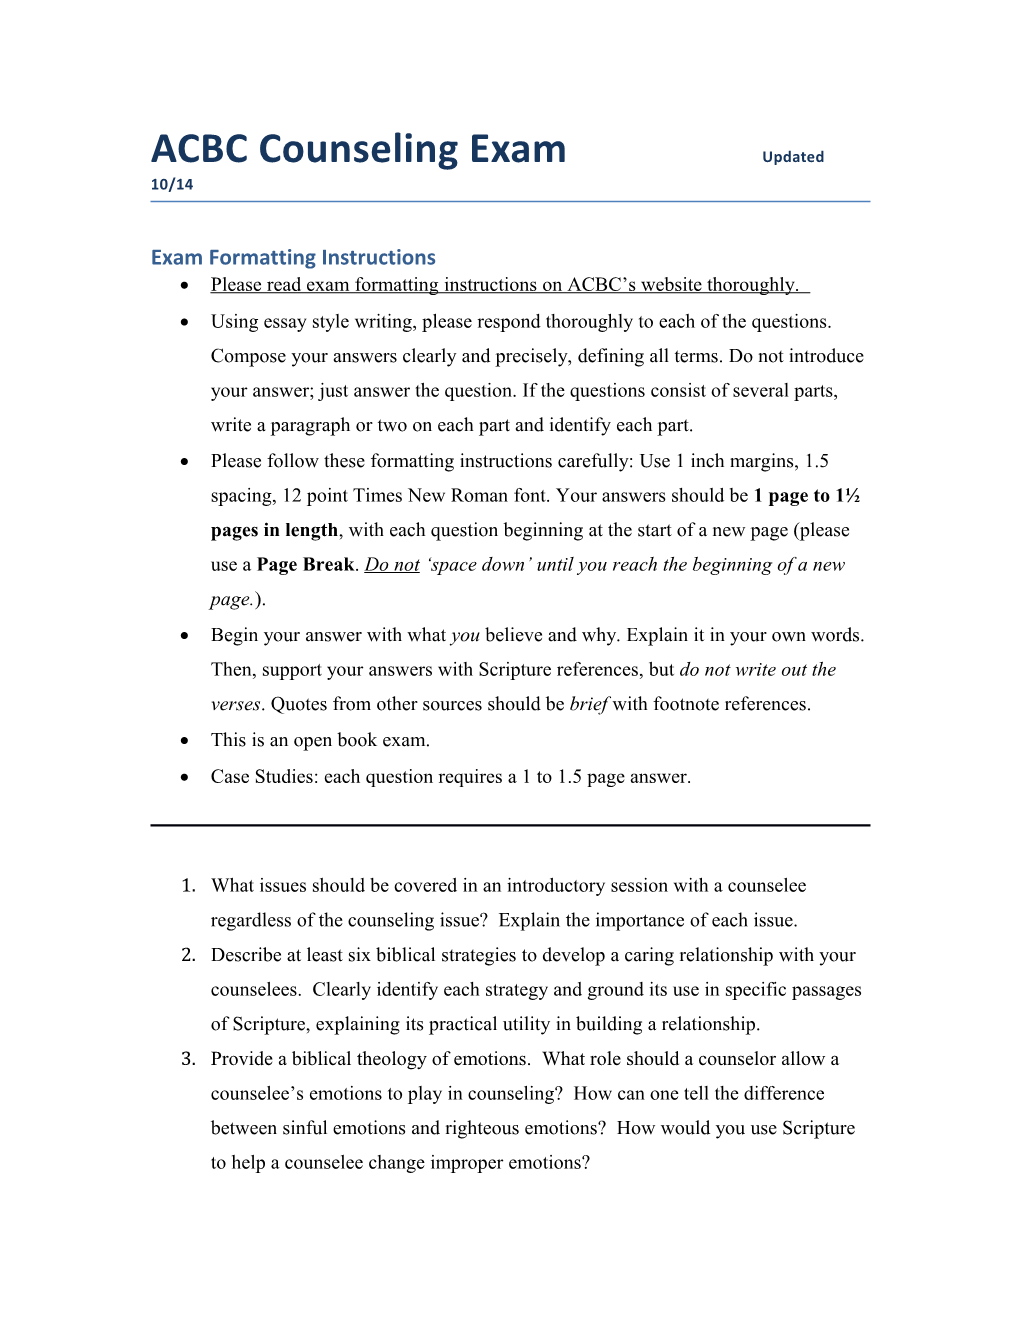 ACBC Counseling Exam Updated 10/14